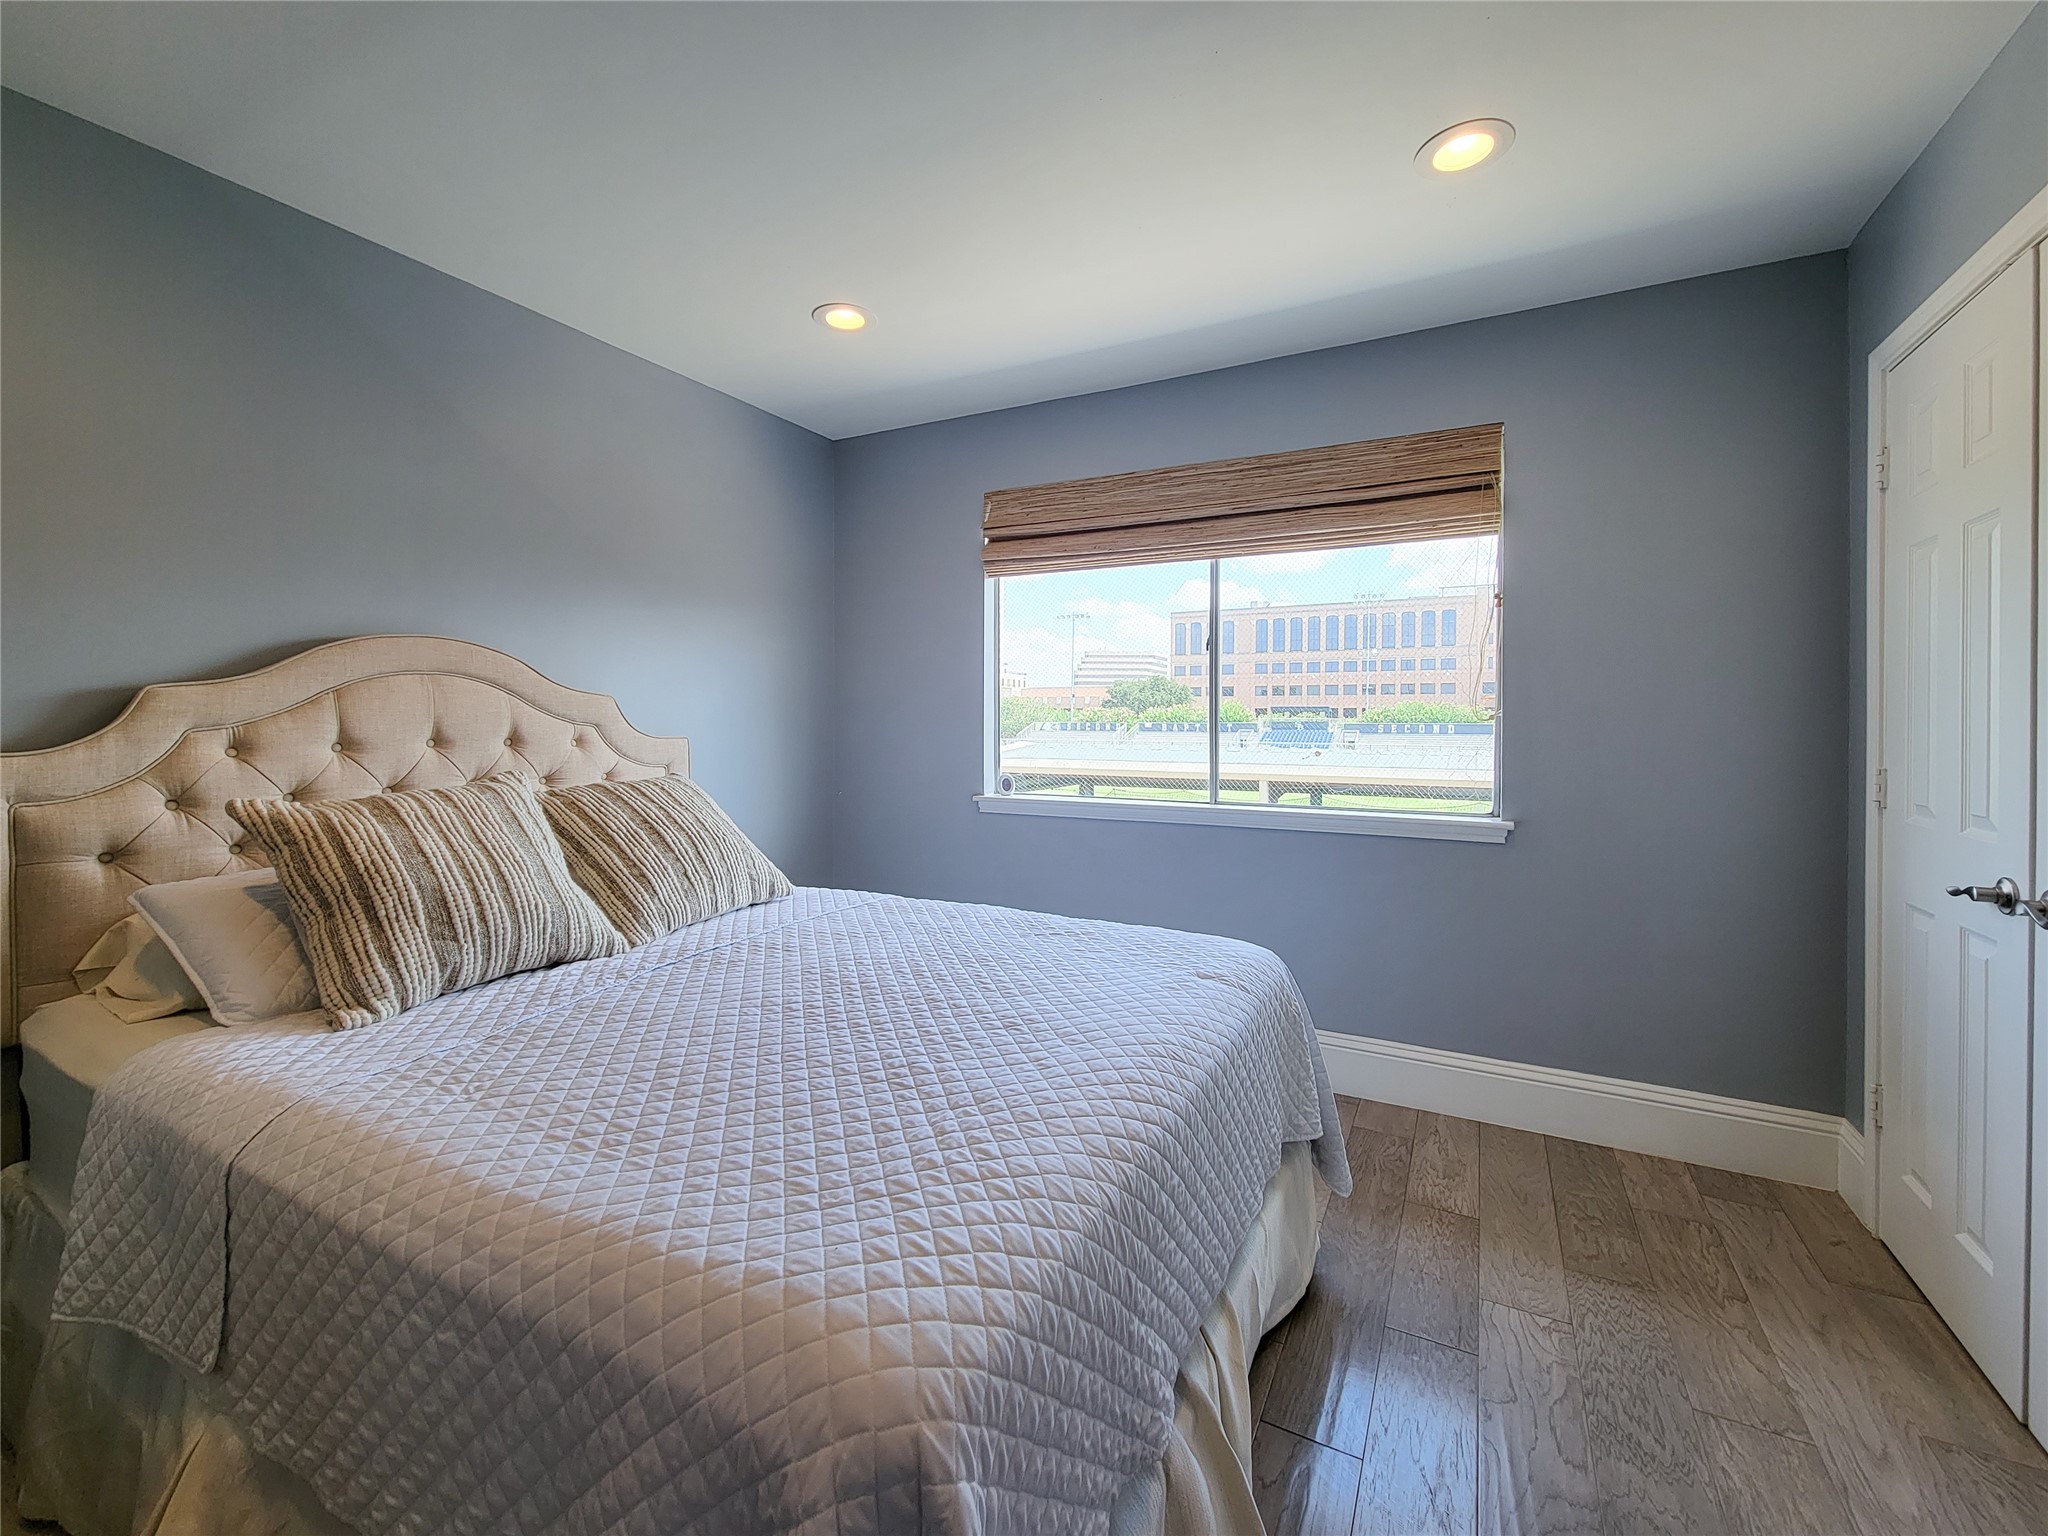 The secondary bedroom is quite spacious and also has a lovely view. Note the wide designer baseboards throughout the home.